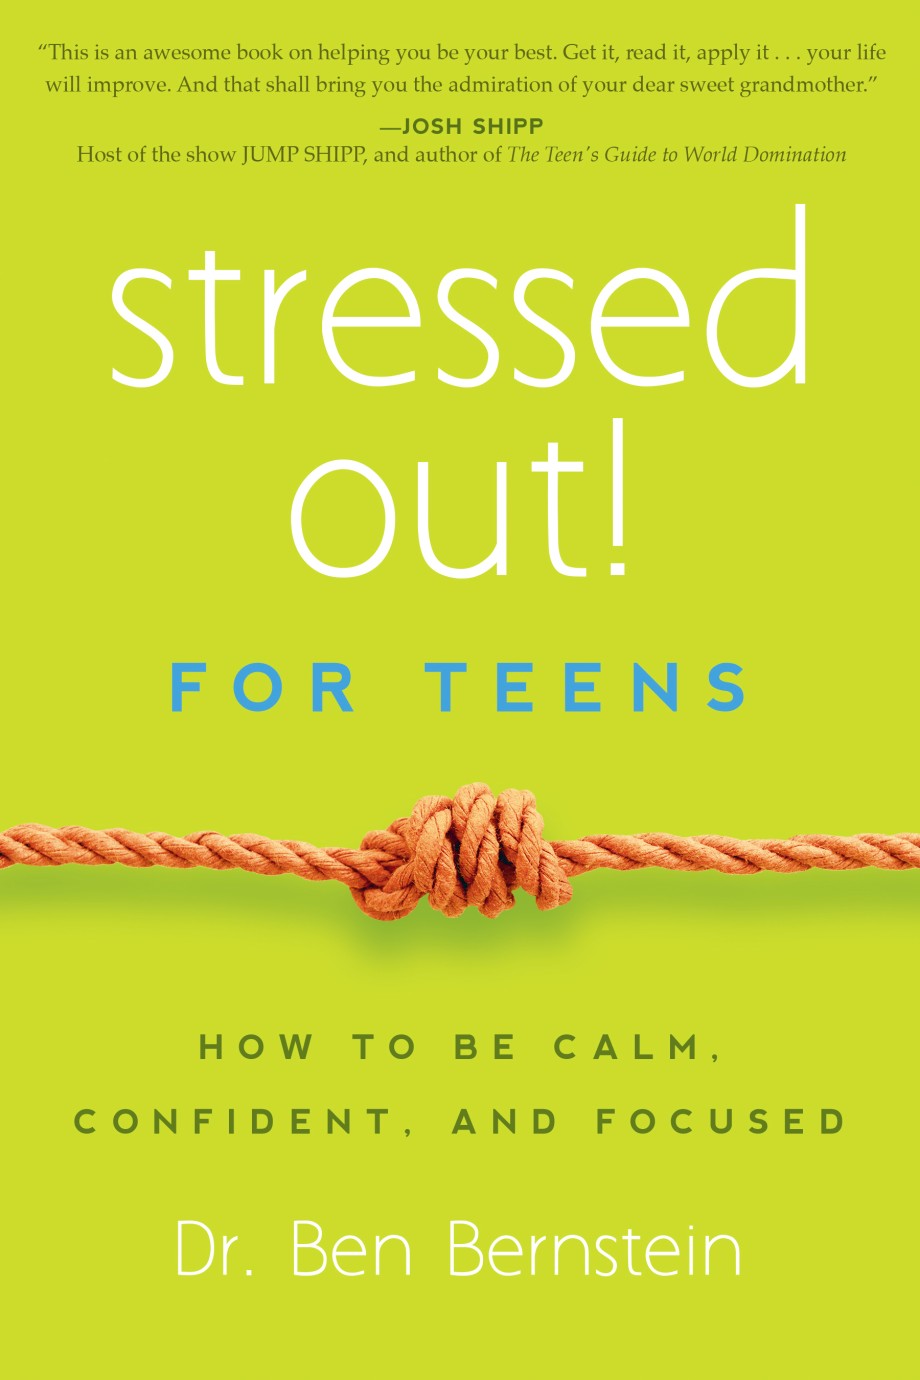 Stressed Out! For Teens How to Be Calm, Confident & Focused